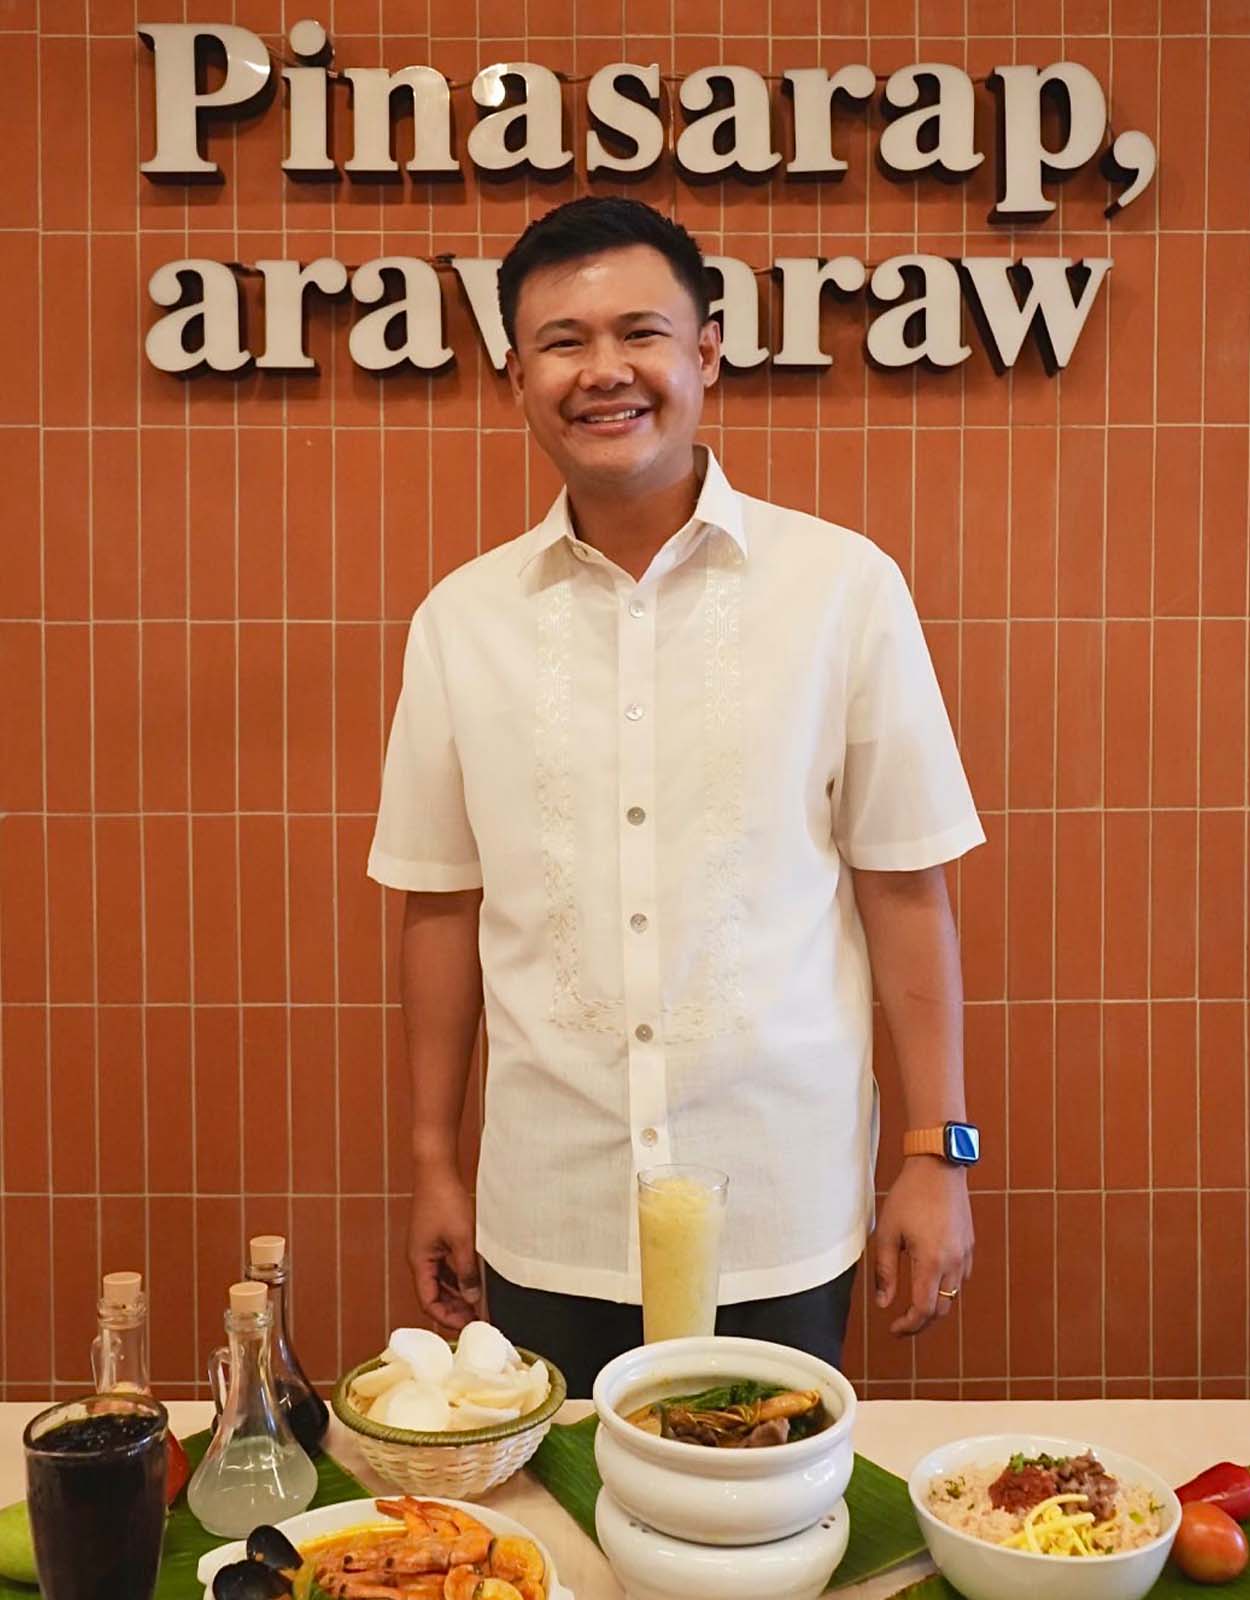 Visionary Restauranteur—David Sison’s passion for Filipino cuisine is fueled by his extensive travels and commitment to local sustainability.